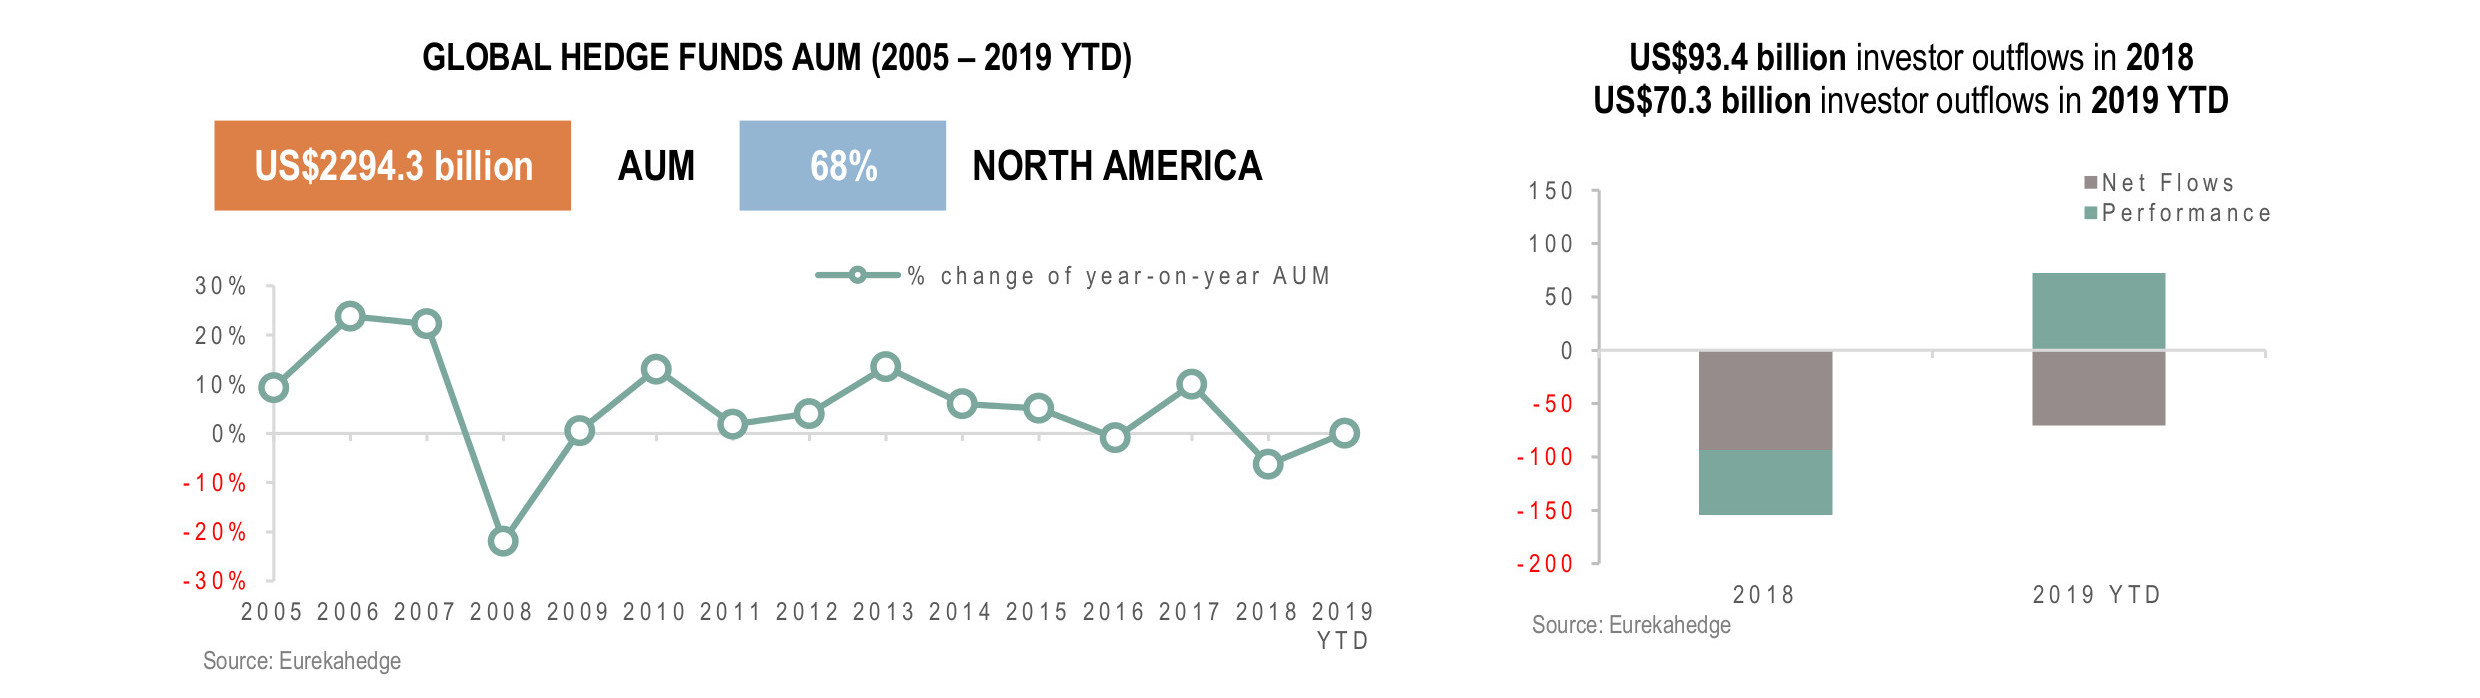 Global Hedge Funds Infographic August 2019 - AUM